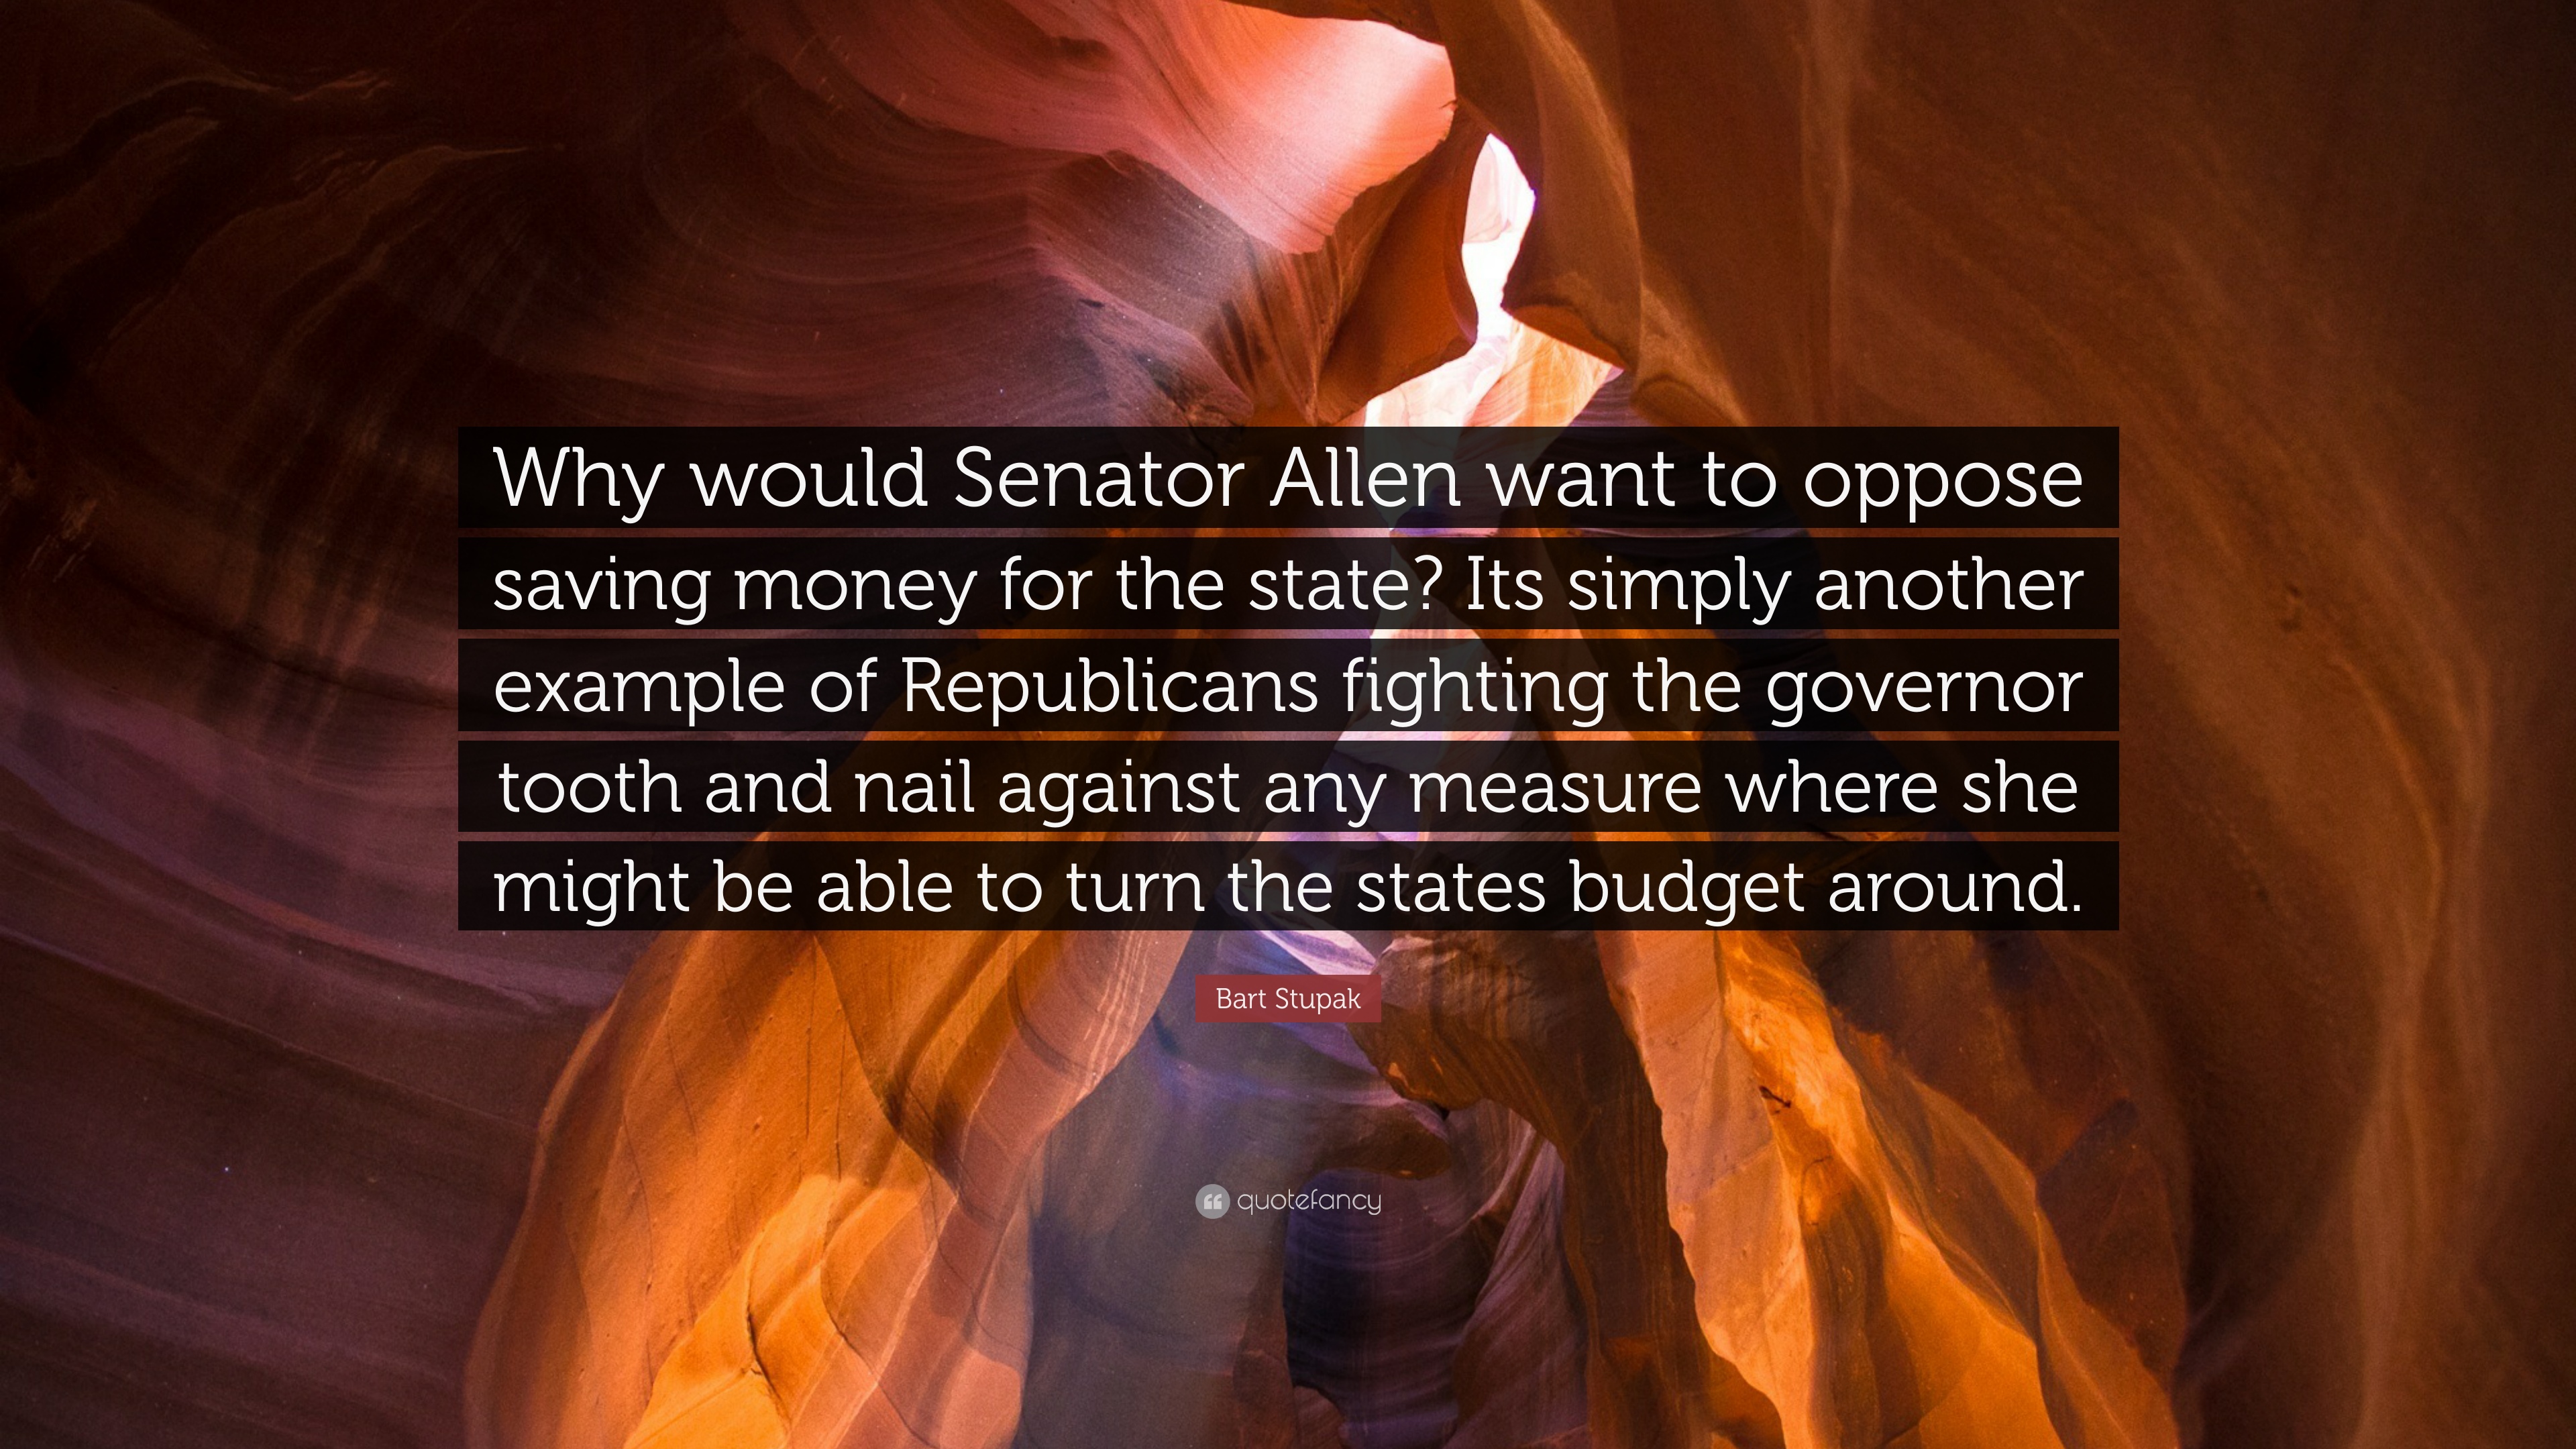 Bart Stupak Quote: “Why would Senator Allen want to oppose saving